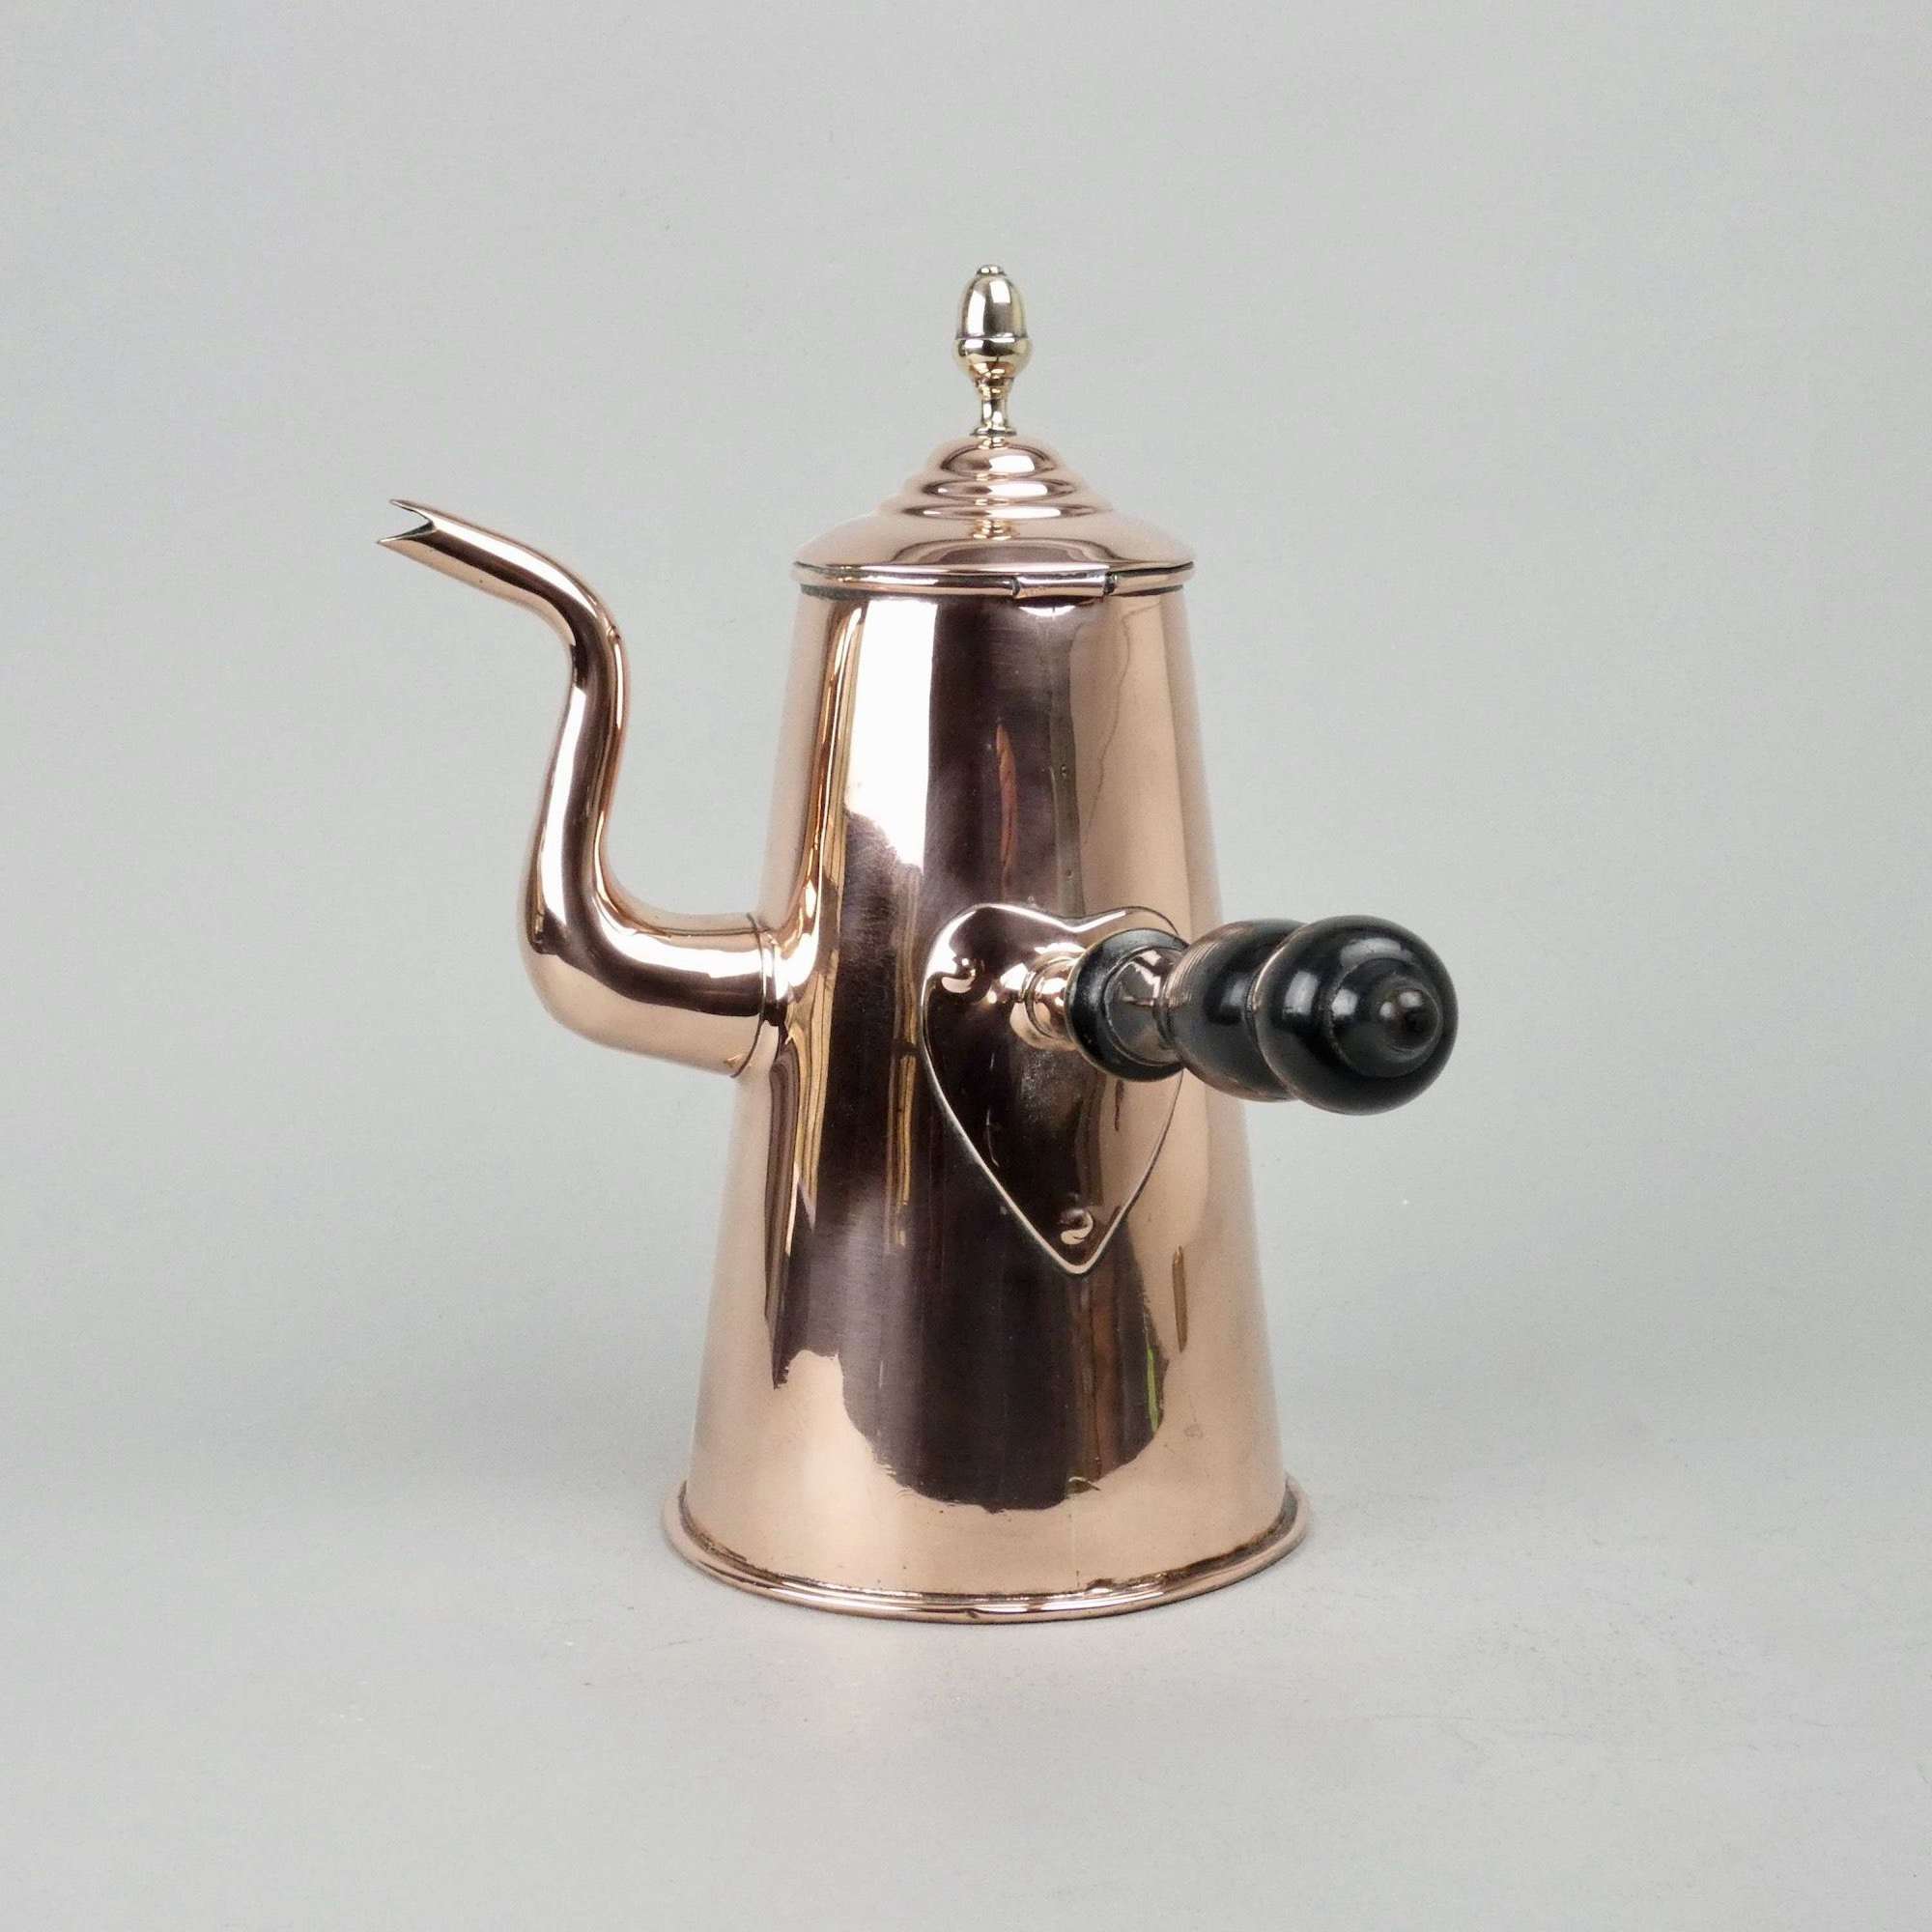 Victorian chocolate or coffeepot